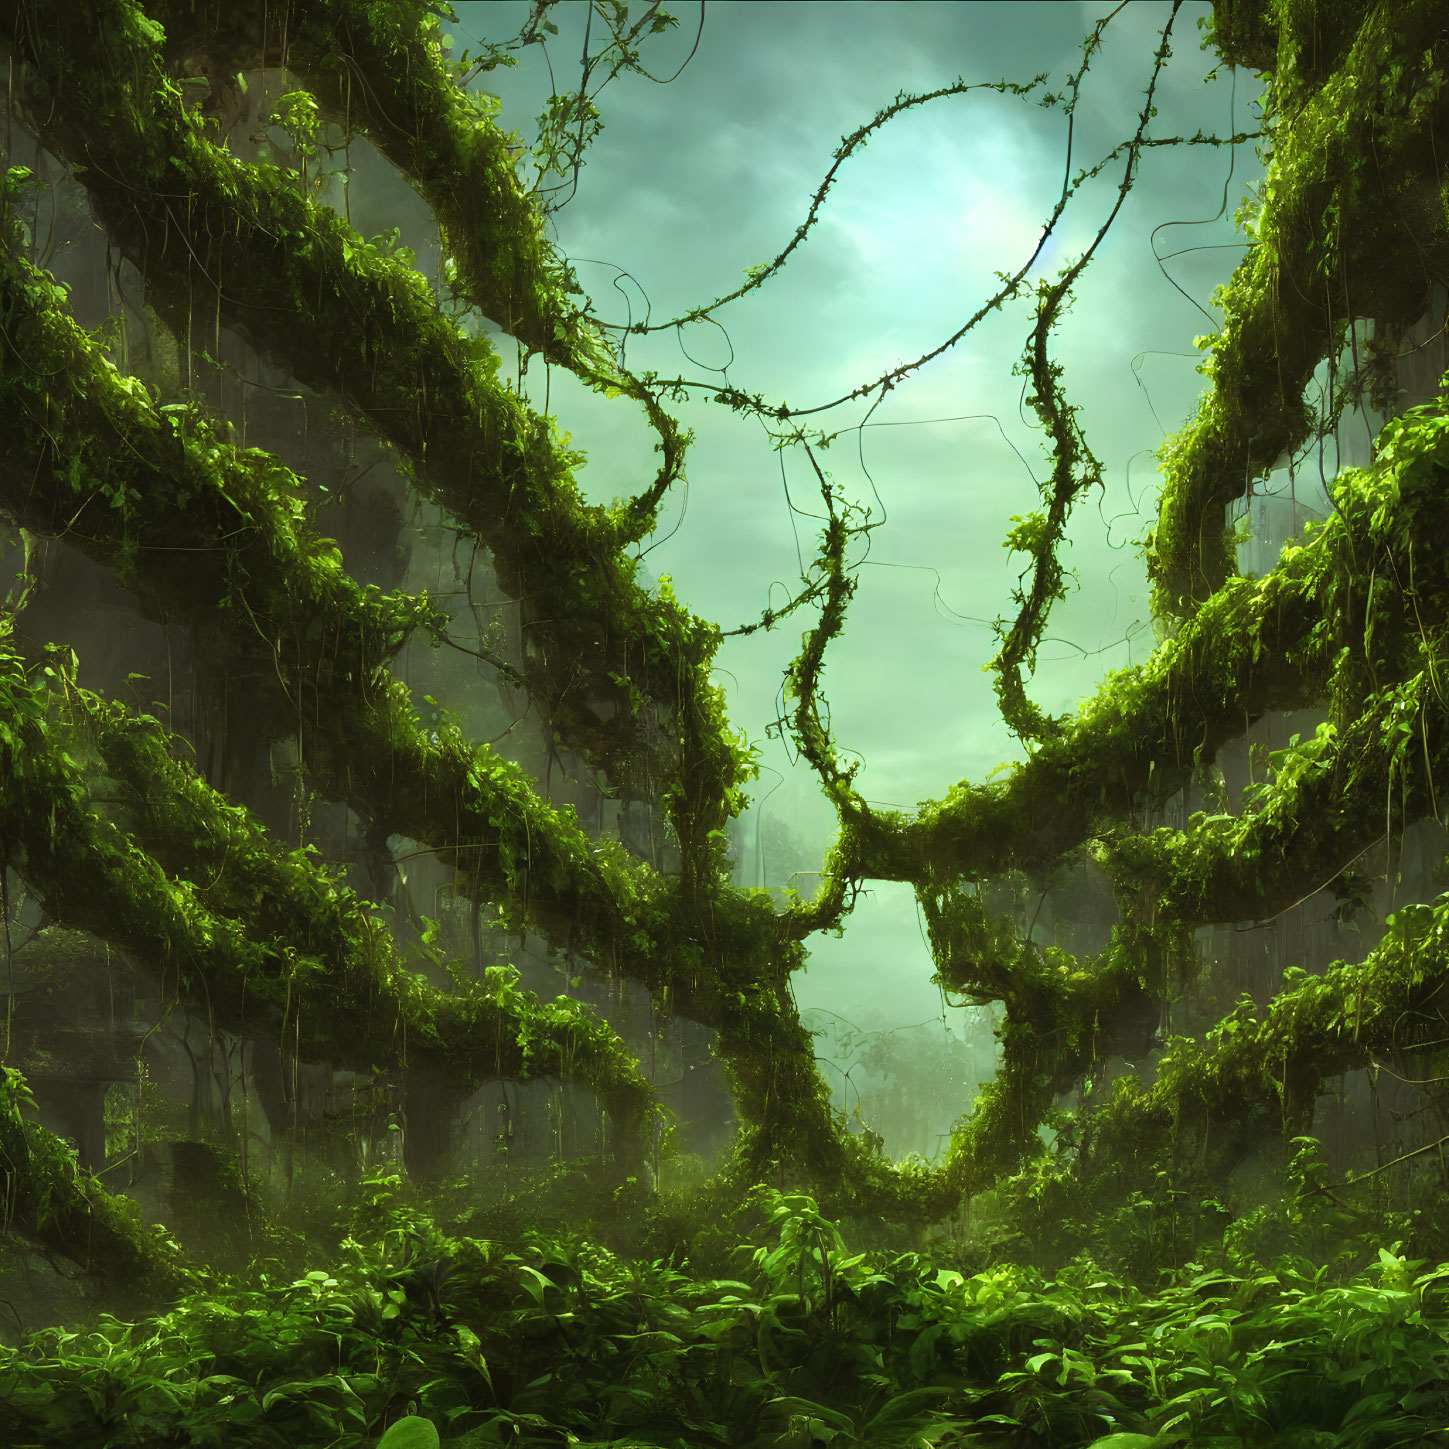 Ancient forest with lush greenery and mystical atmosphere